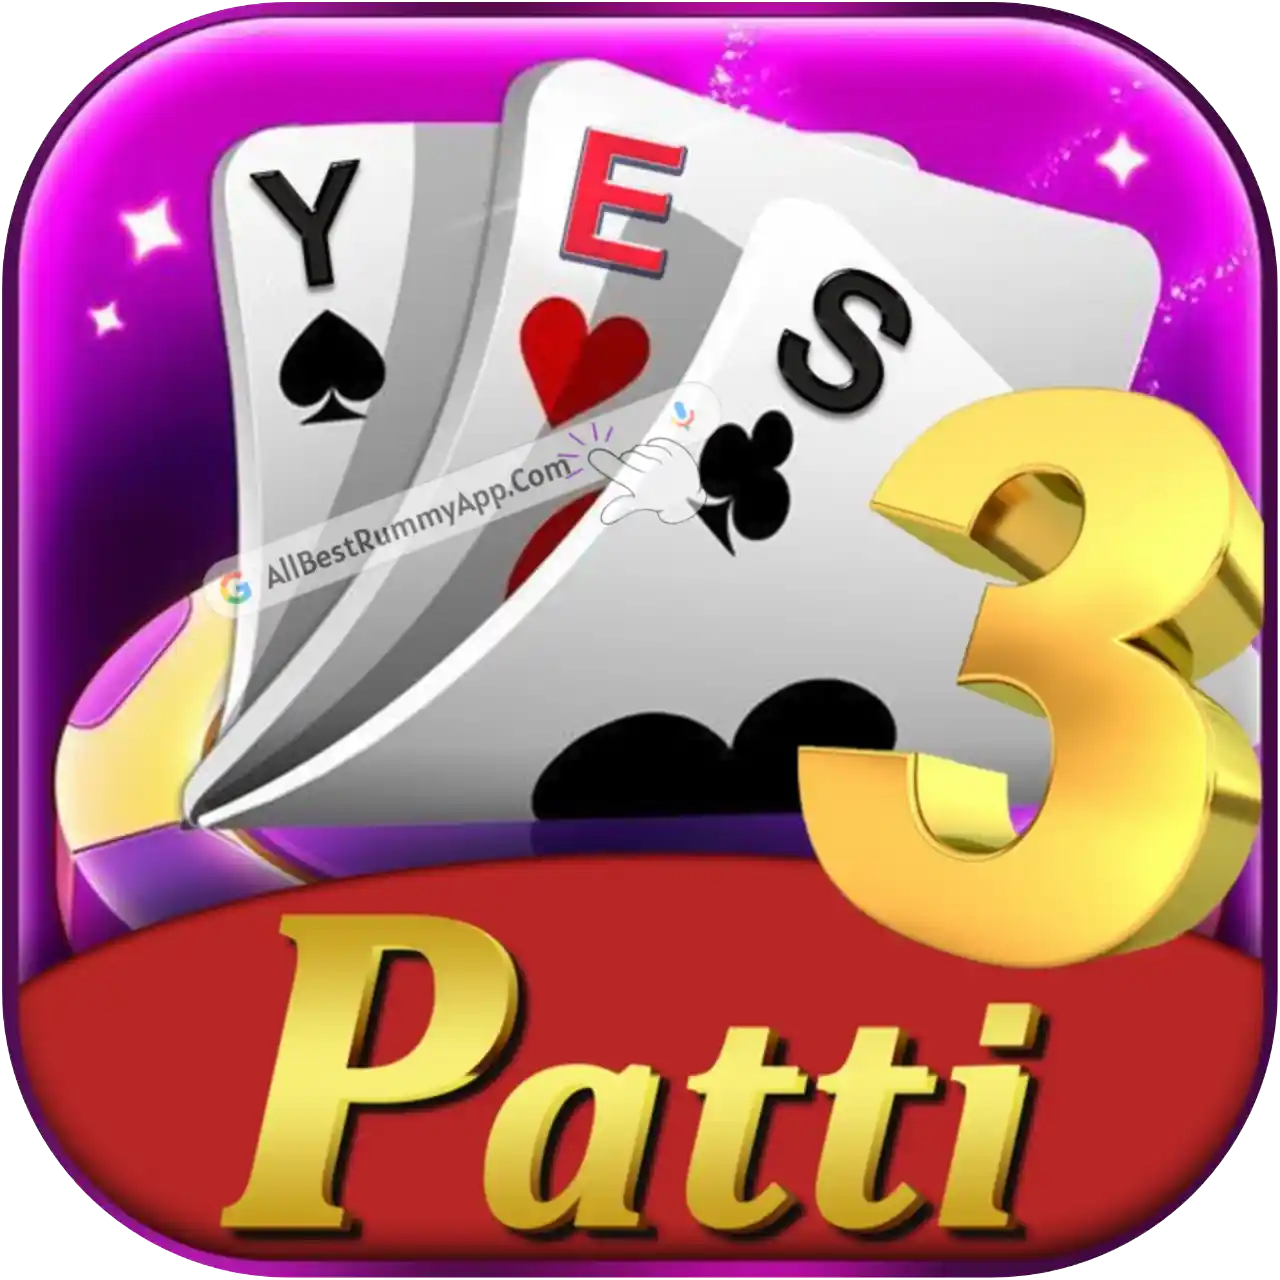 Yes 3 Patti - India Game Download